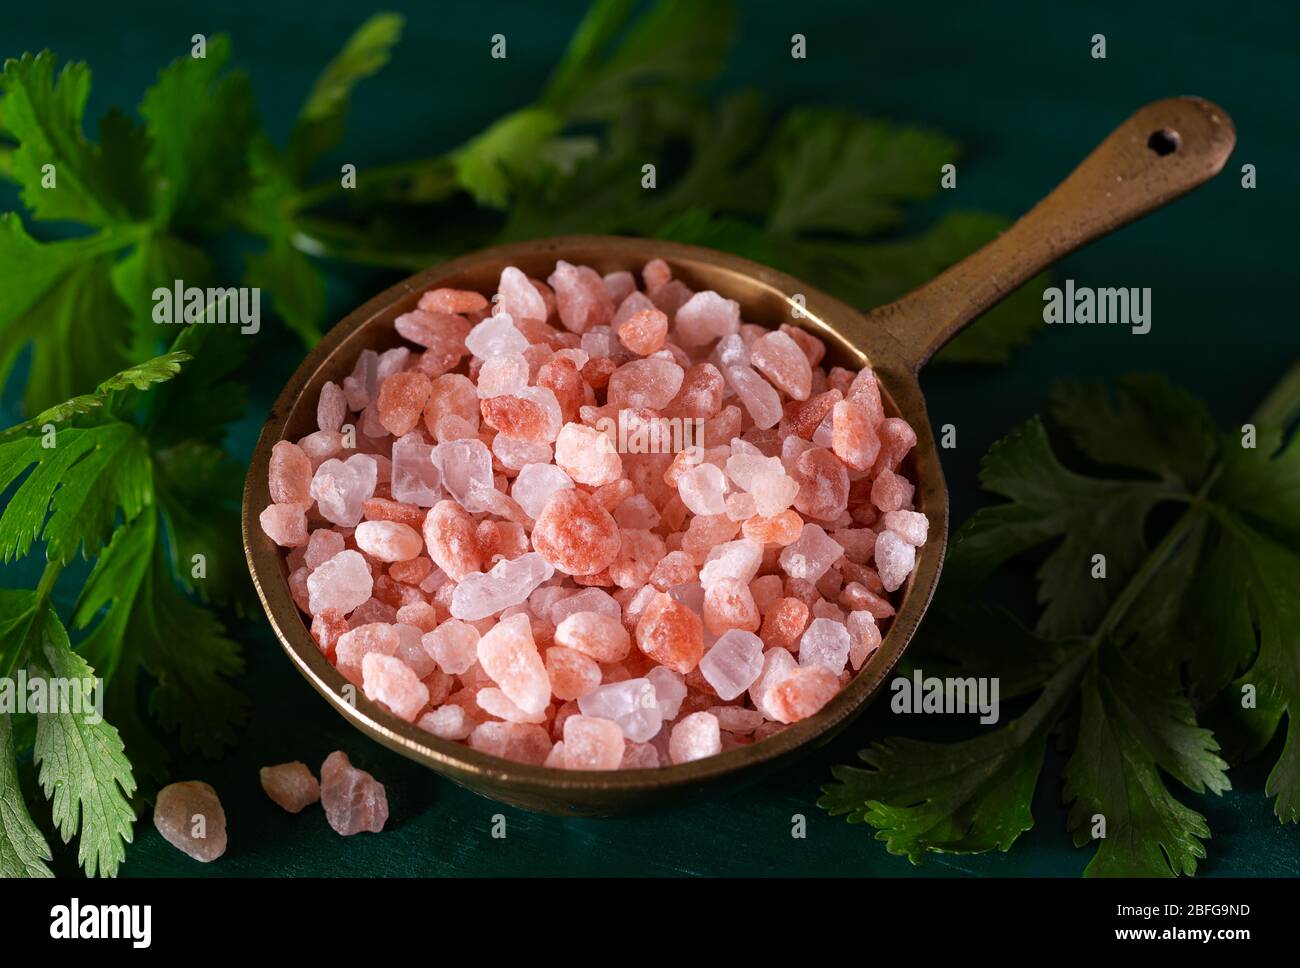 Pink Himalayan Salt with Fresh Cilantro in an antique container on a green surface Stock Photo